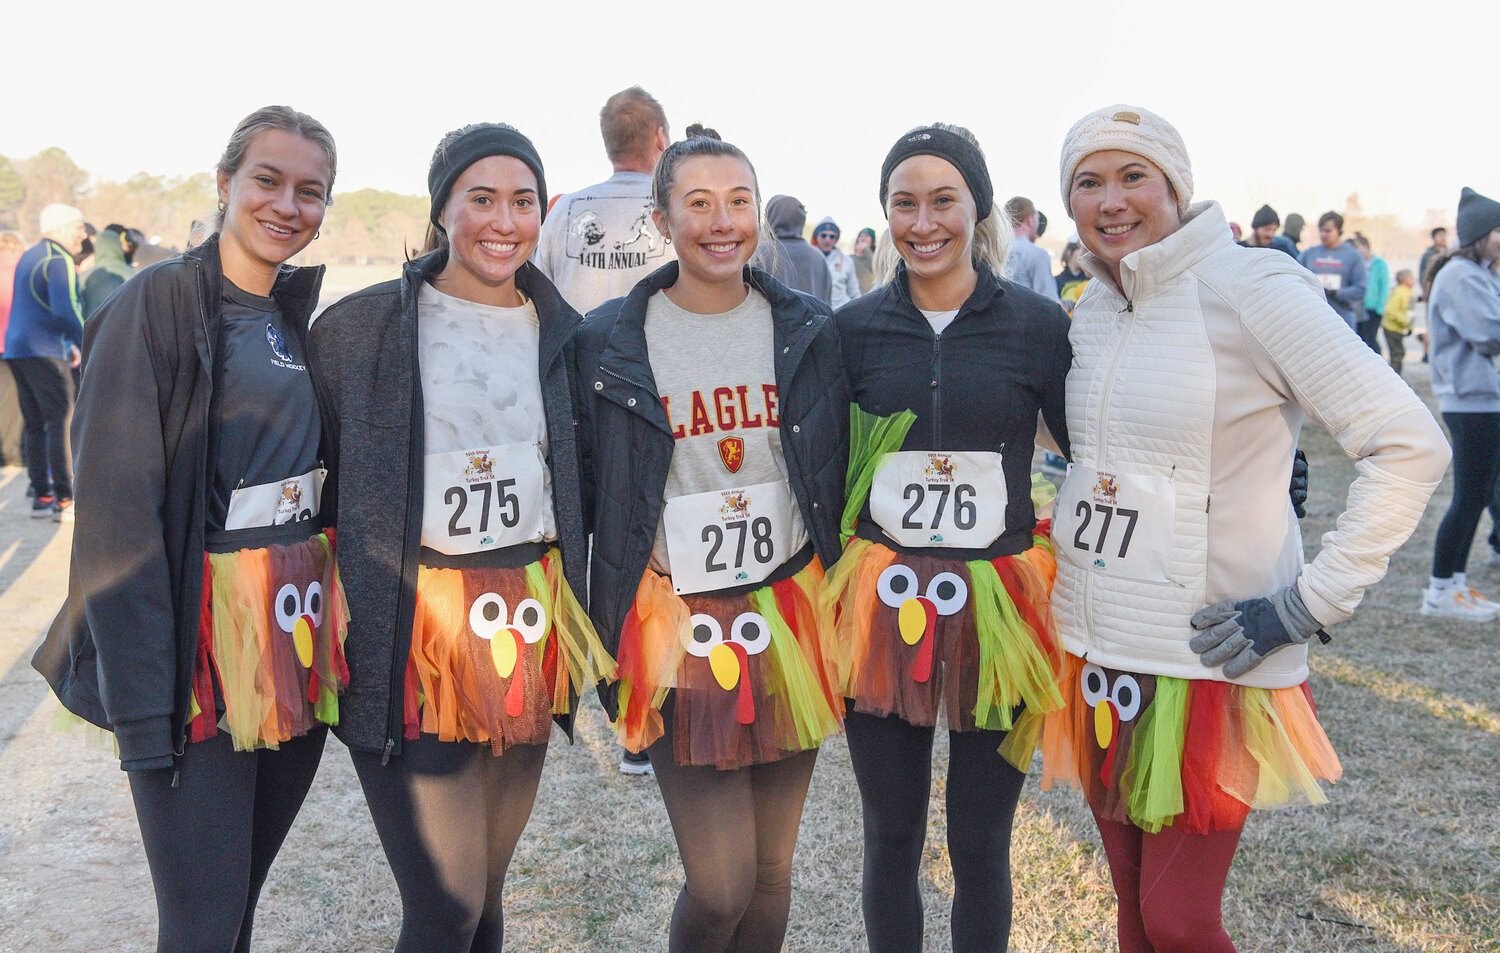 As always, participants are encouraged to dress up for the chance to win the Best Thanksgiving Costume. This year’s race is set for Thanksgiving morning, Nov. 23, at Pemberton Park.